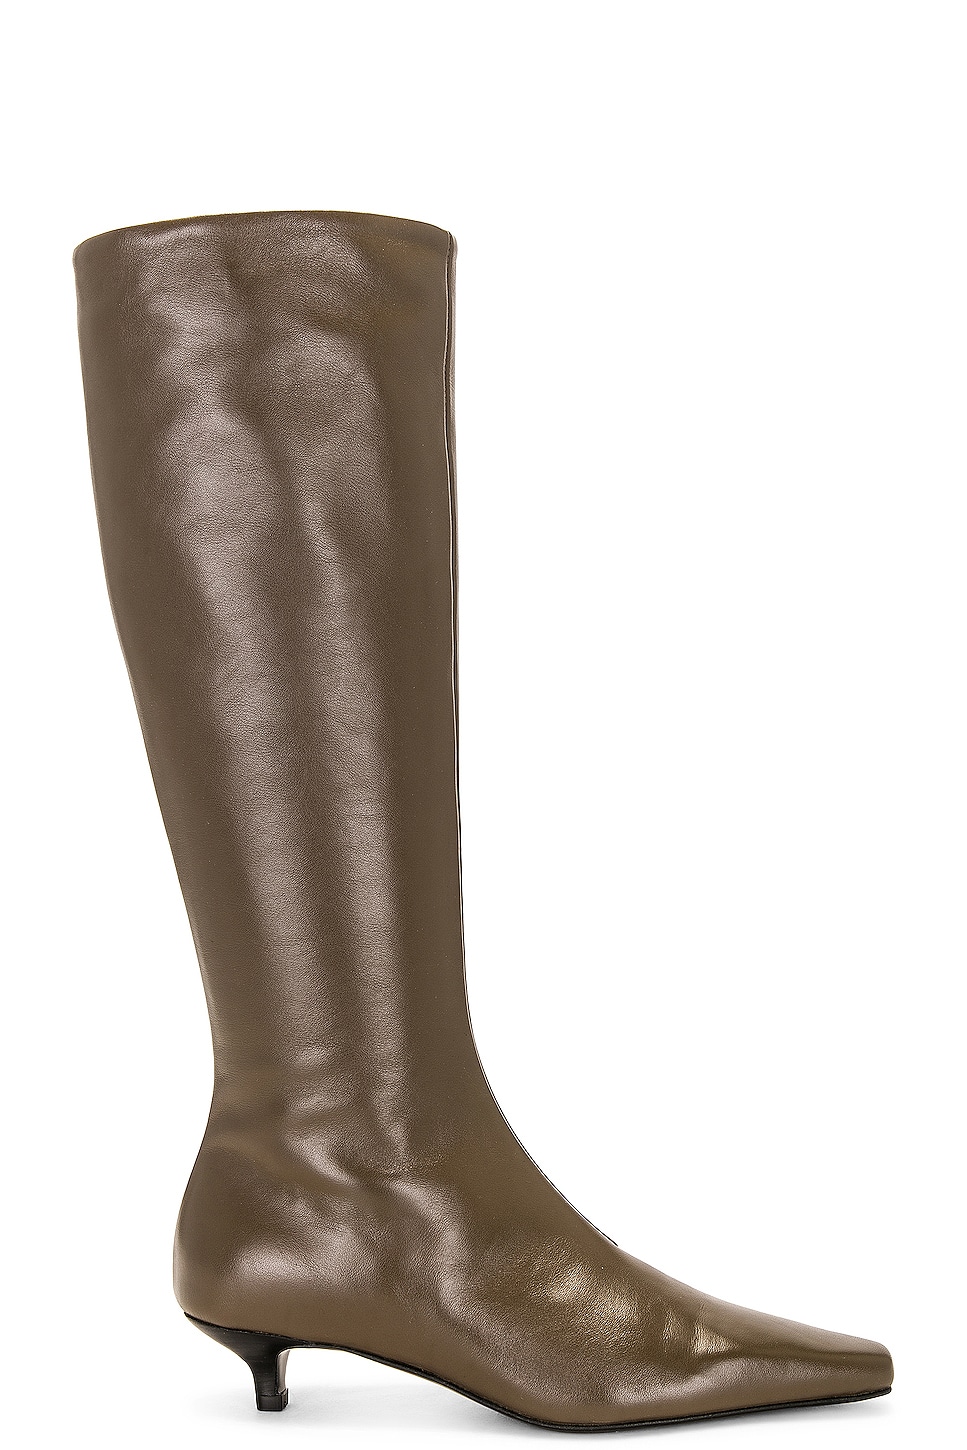 Image 1 of Toteme The Slim Knee High Boot in Ash